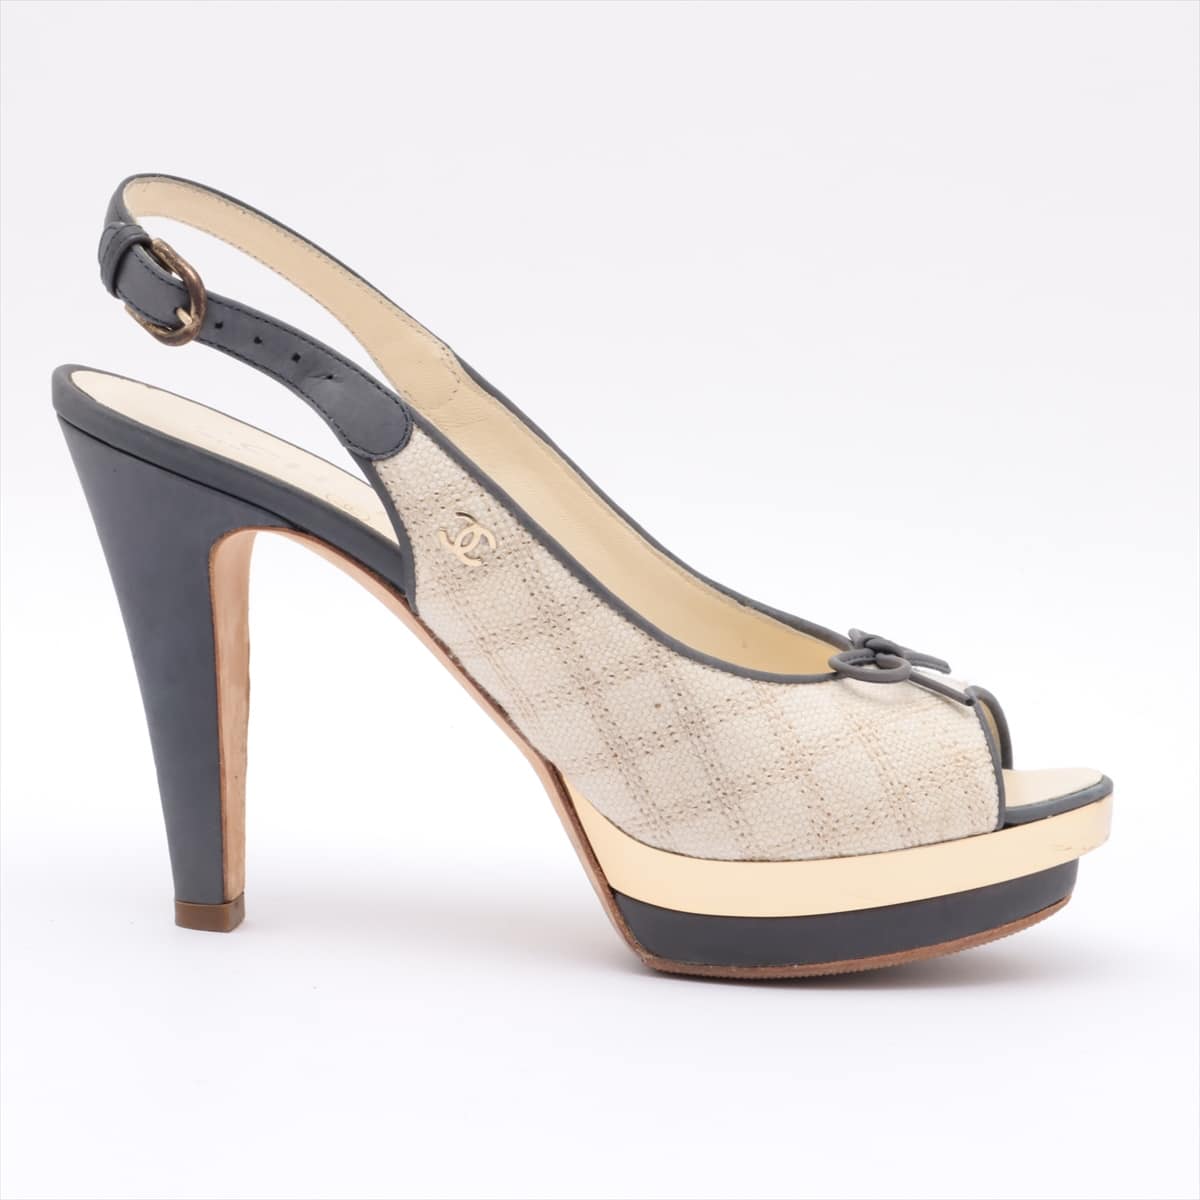 Chanel Tweed x Leather Sandals 36.5 Ladies' Ivory Has half rubber